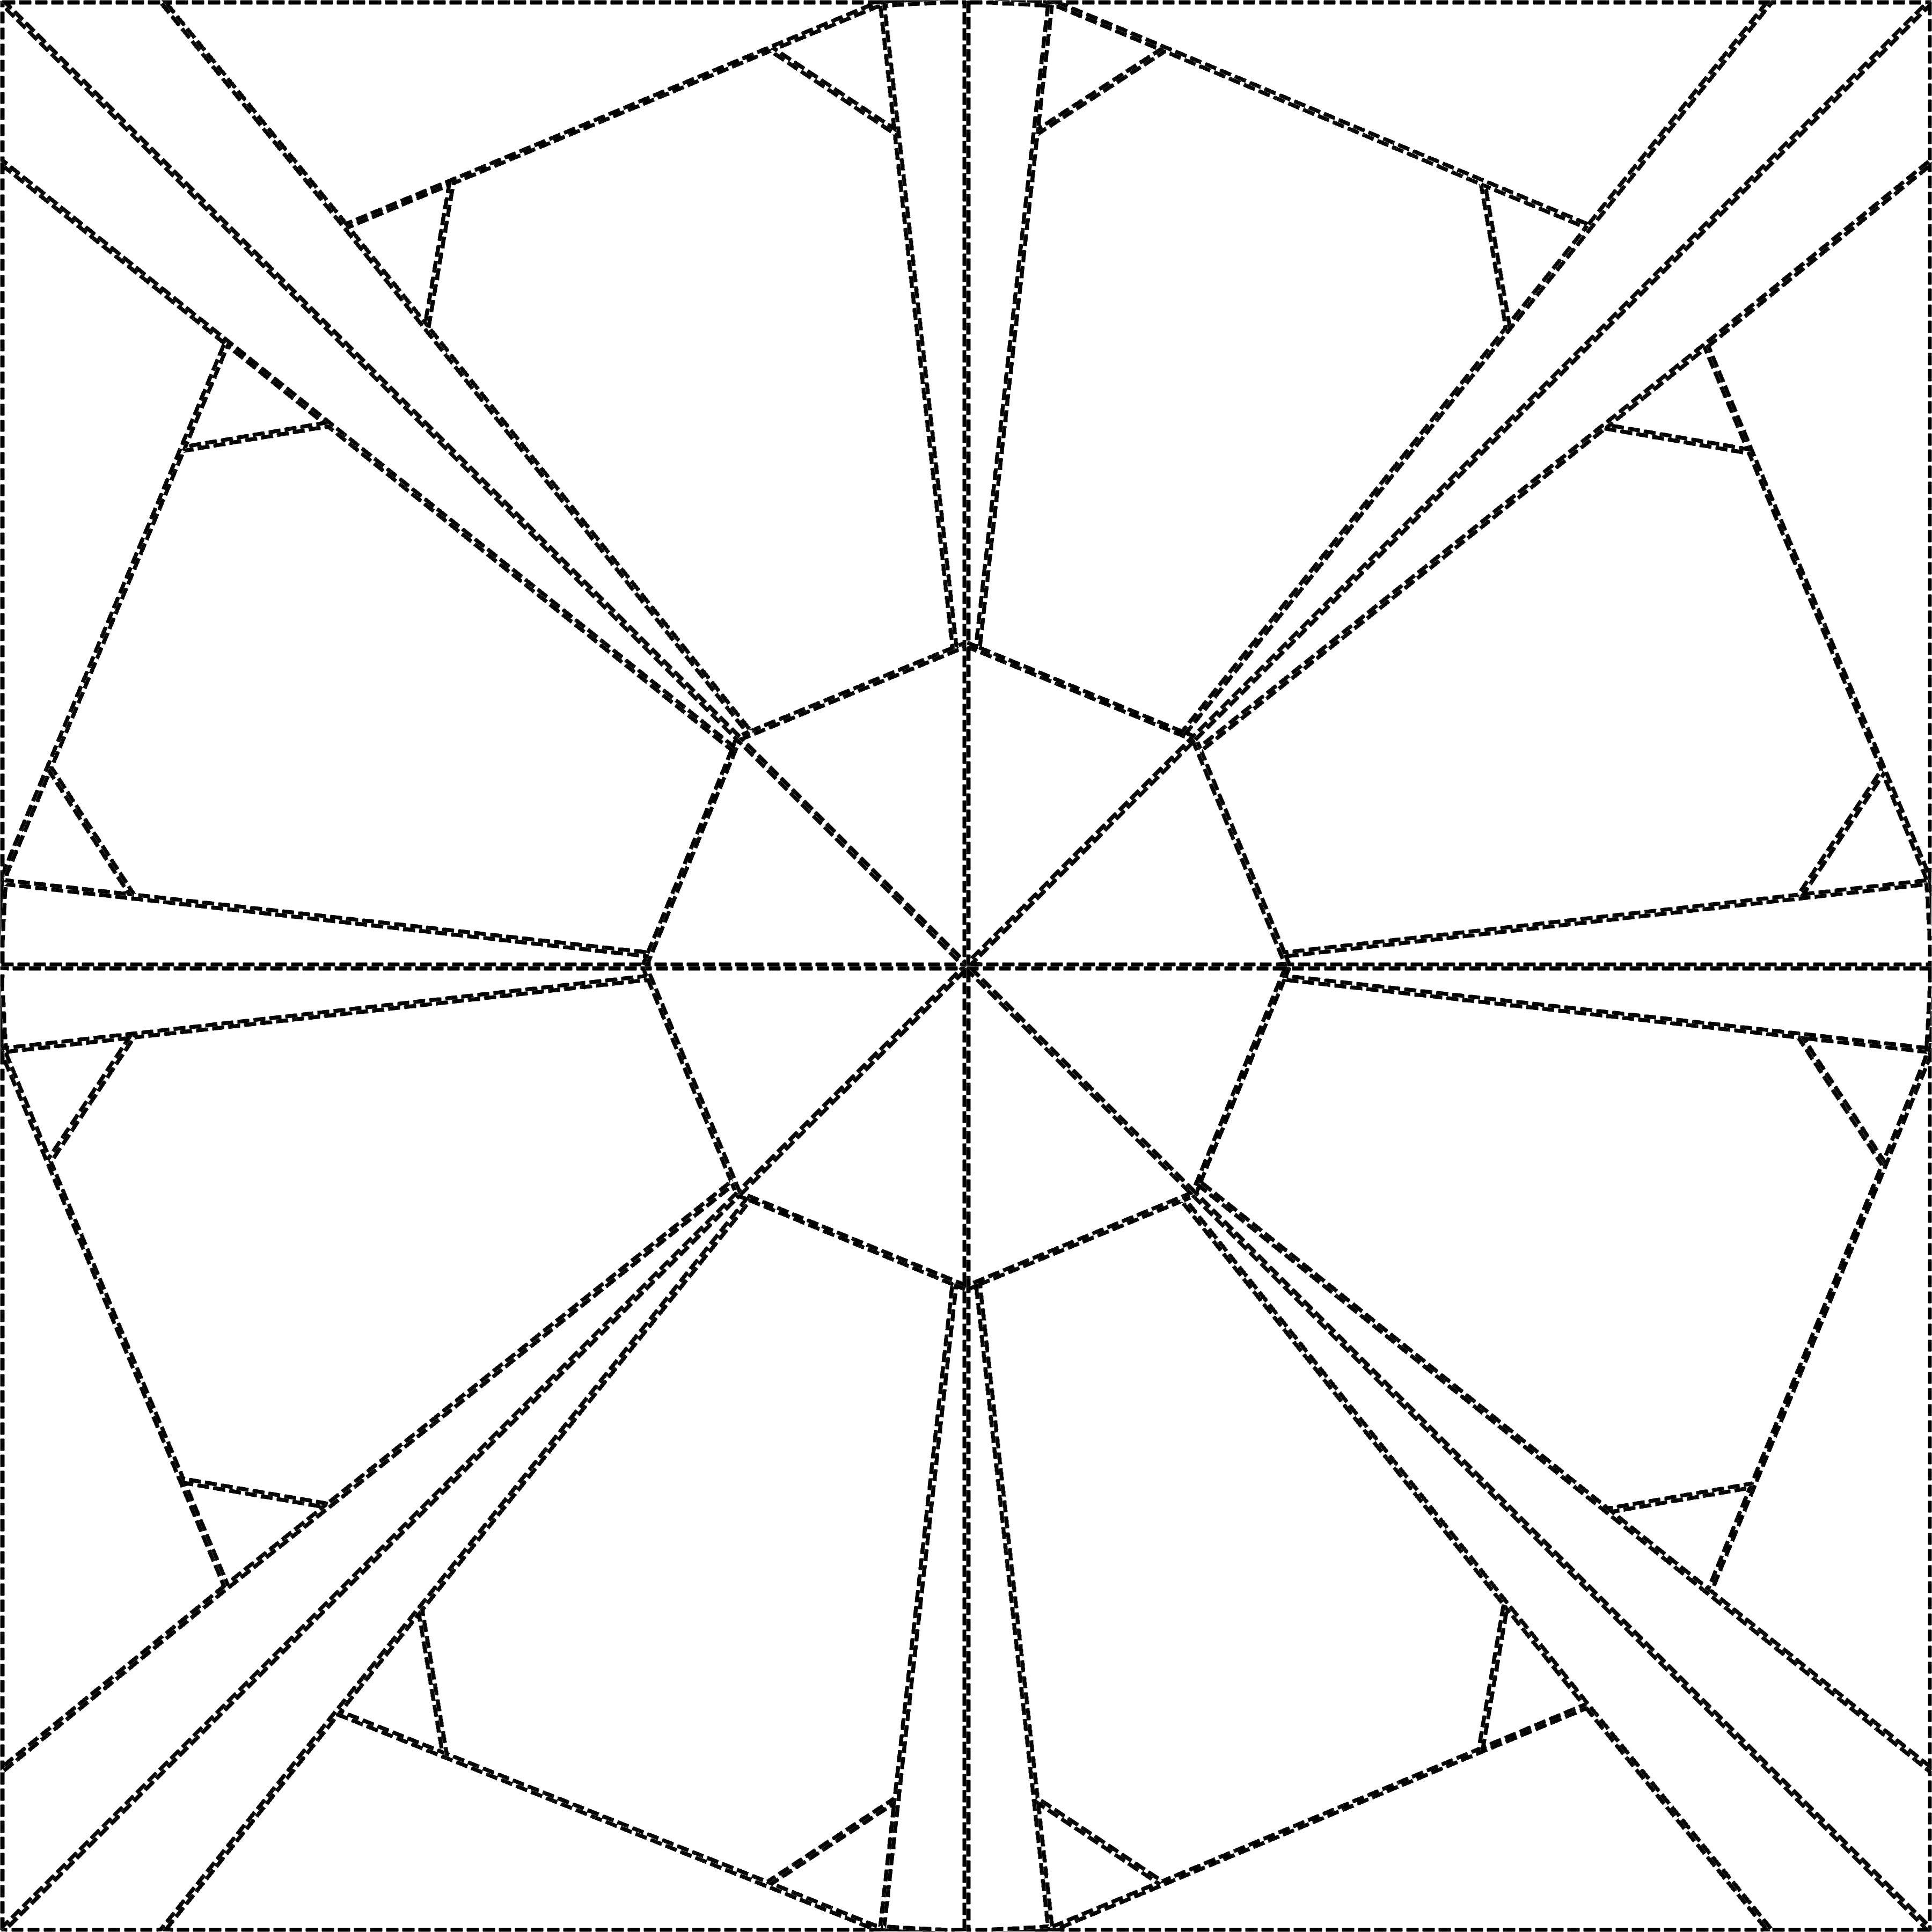 Coloring Stained glass pattern. Category coloring. Tags:  Patterns, geometric.